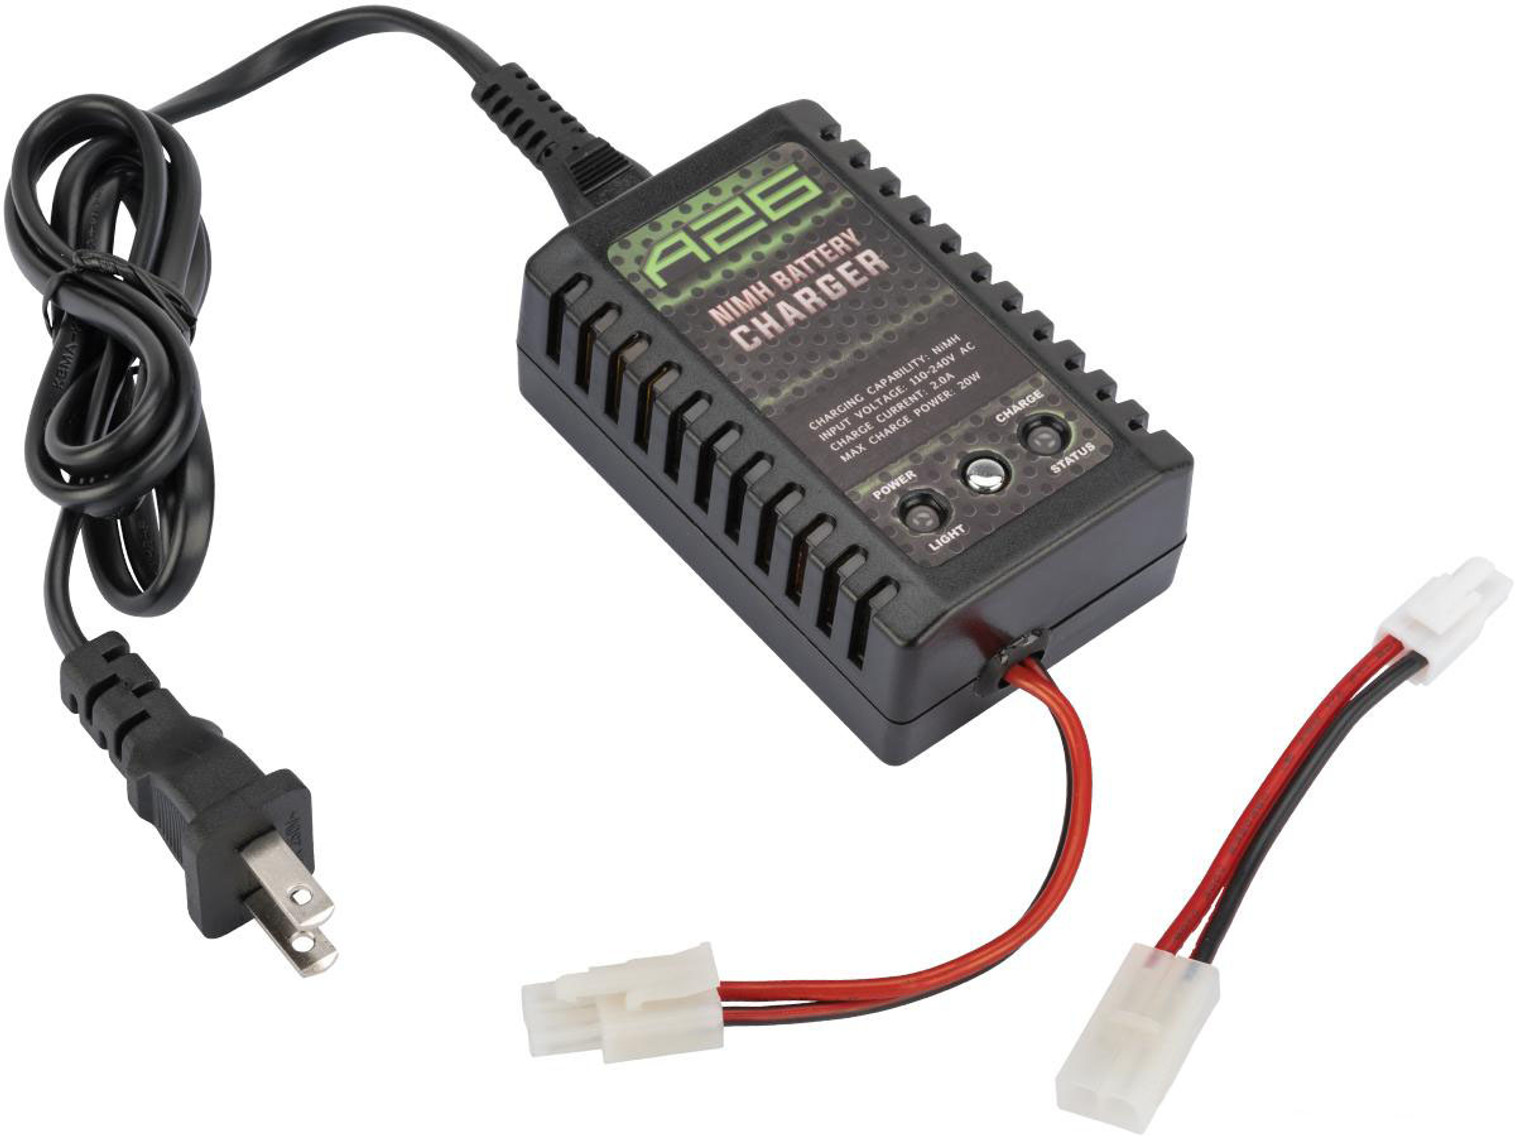 Airsoft A26 / X-7 Compact Smart Charger for NiMh NiCd AEG Batteries by SoftAir USA